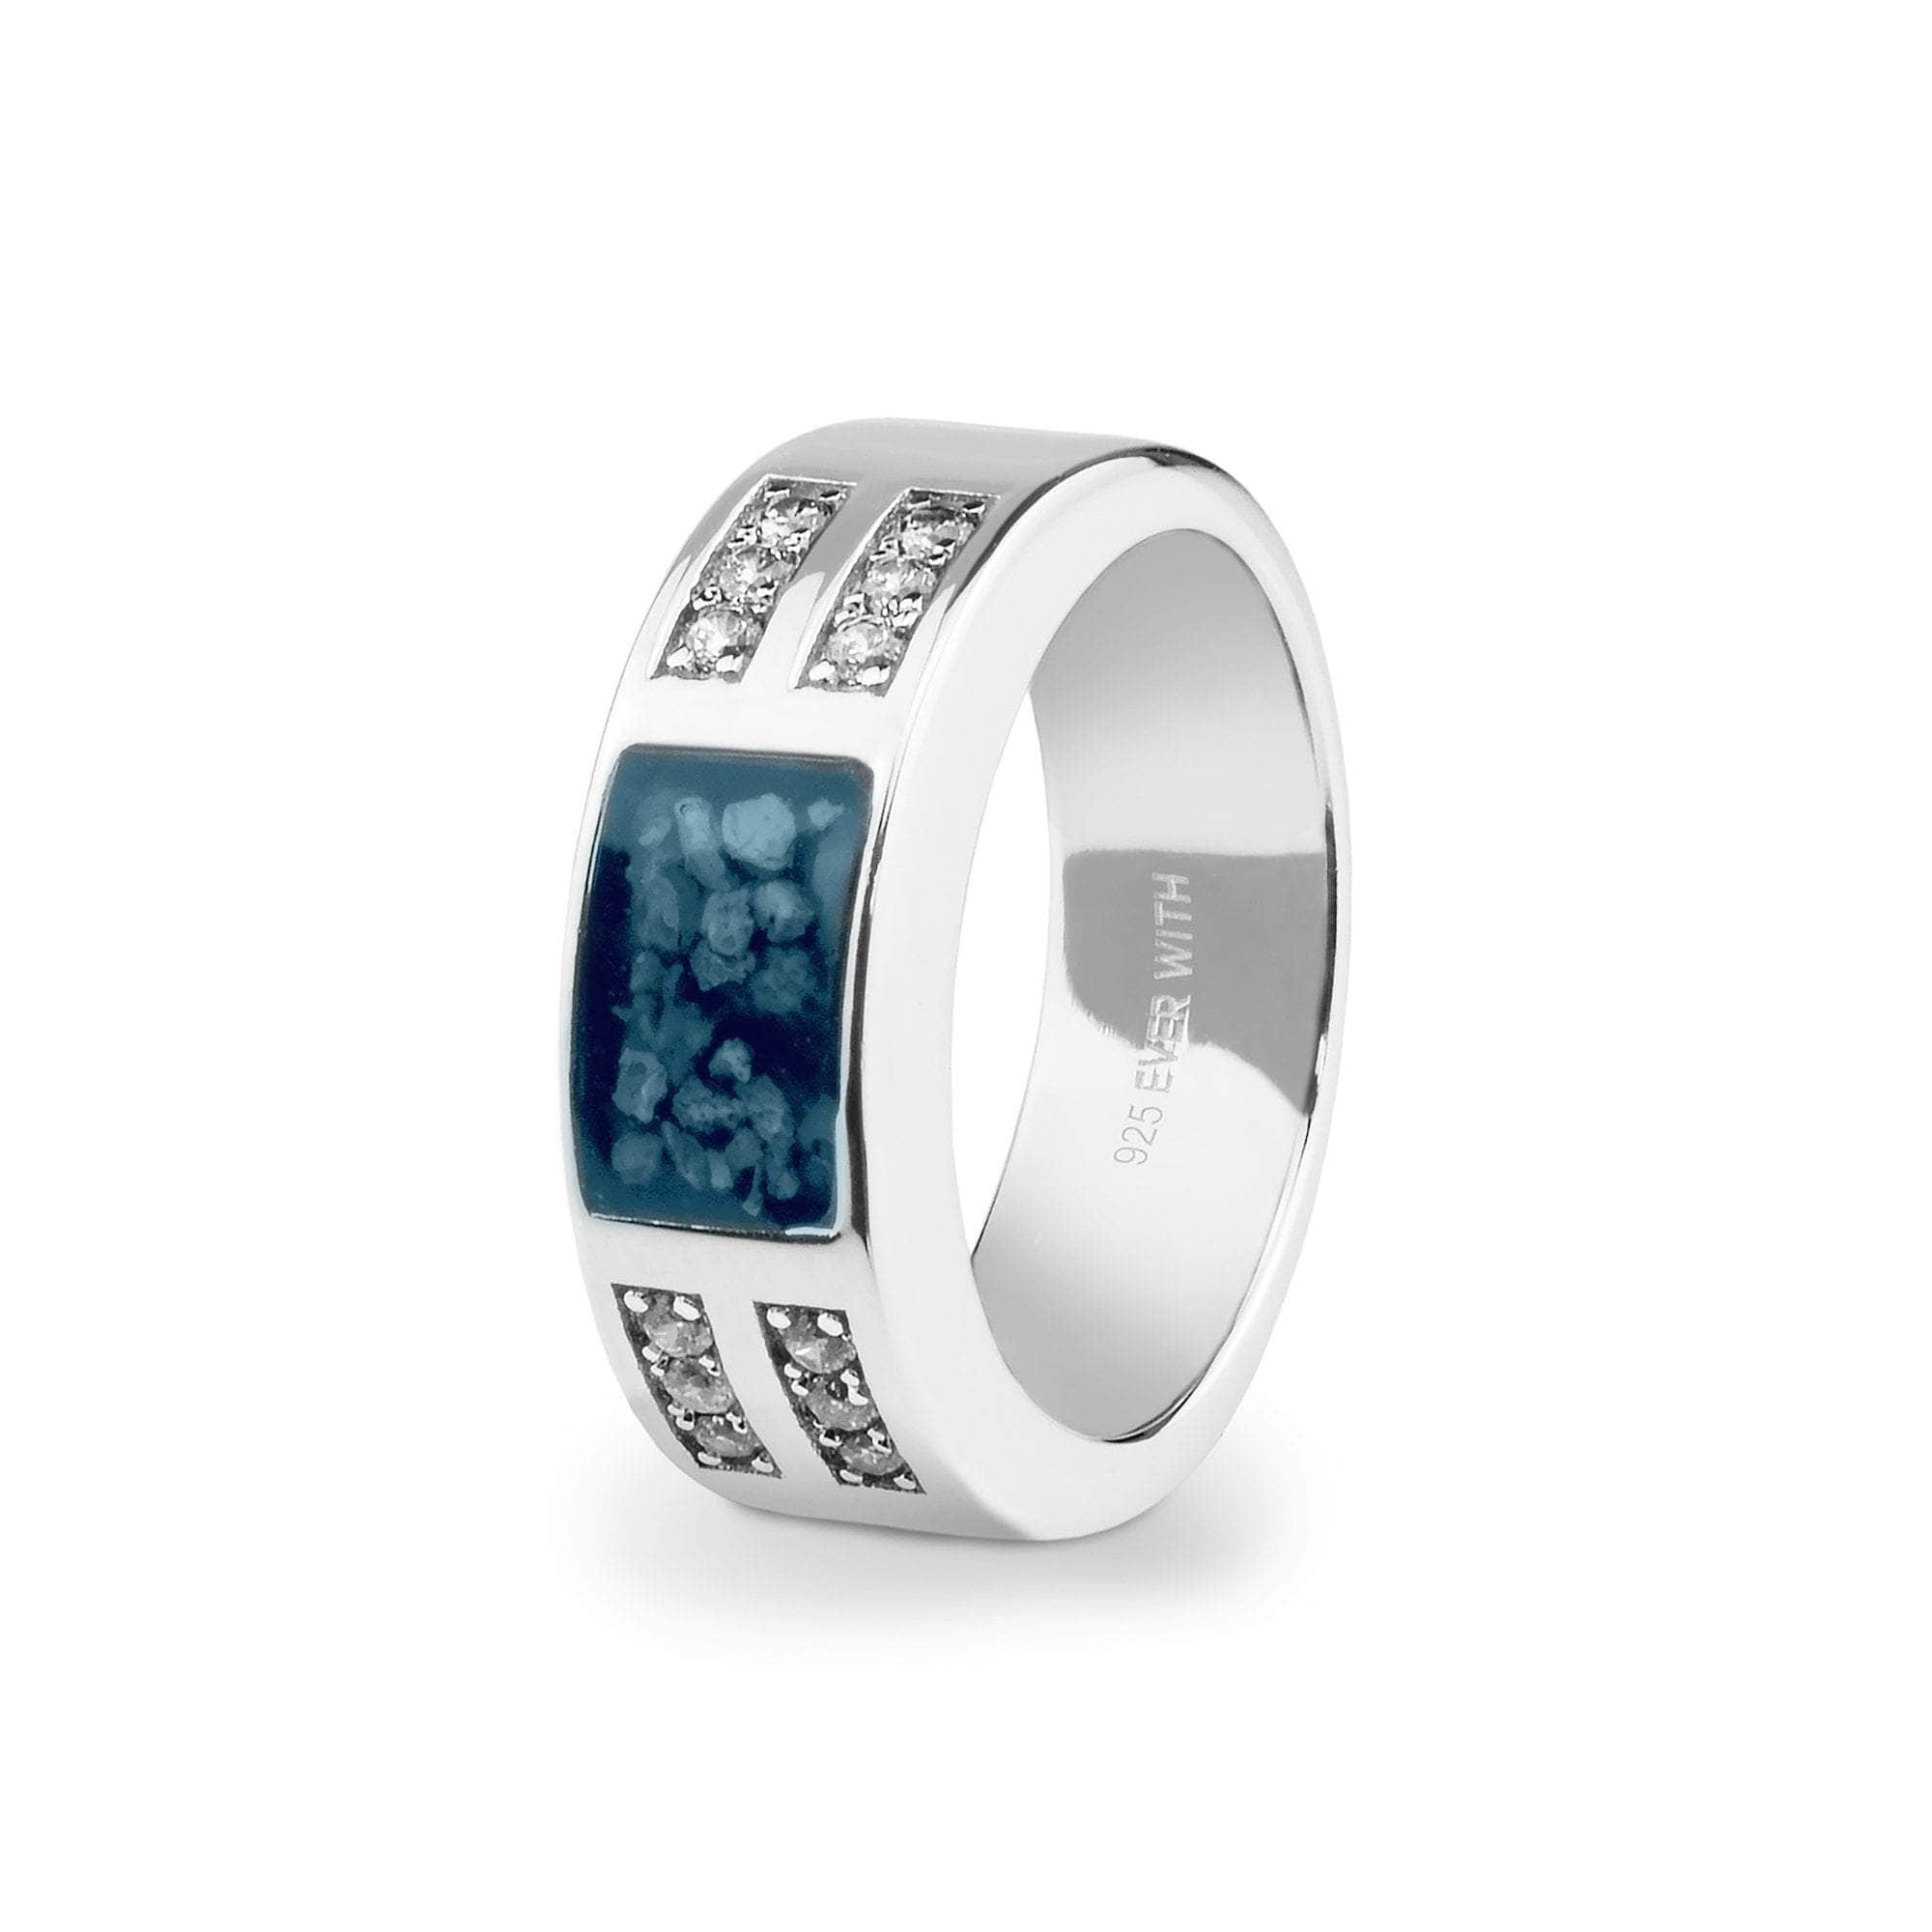 Gents Oblong Memorial Ashes Ring with Fine Crystals